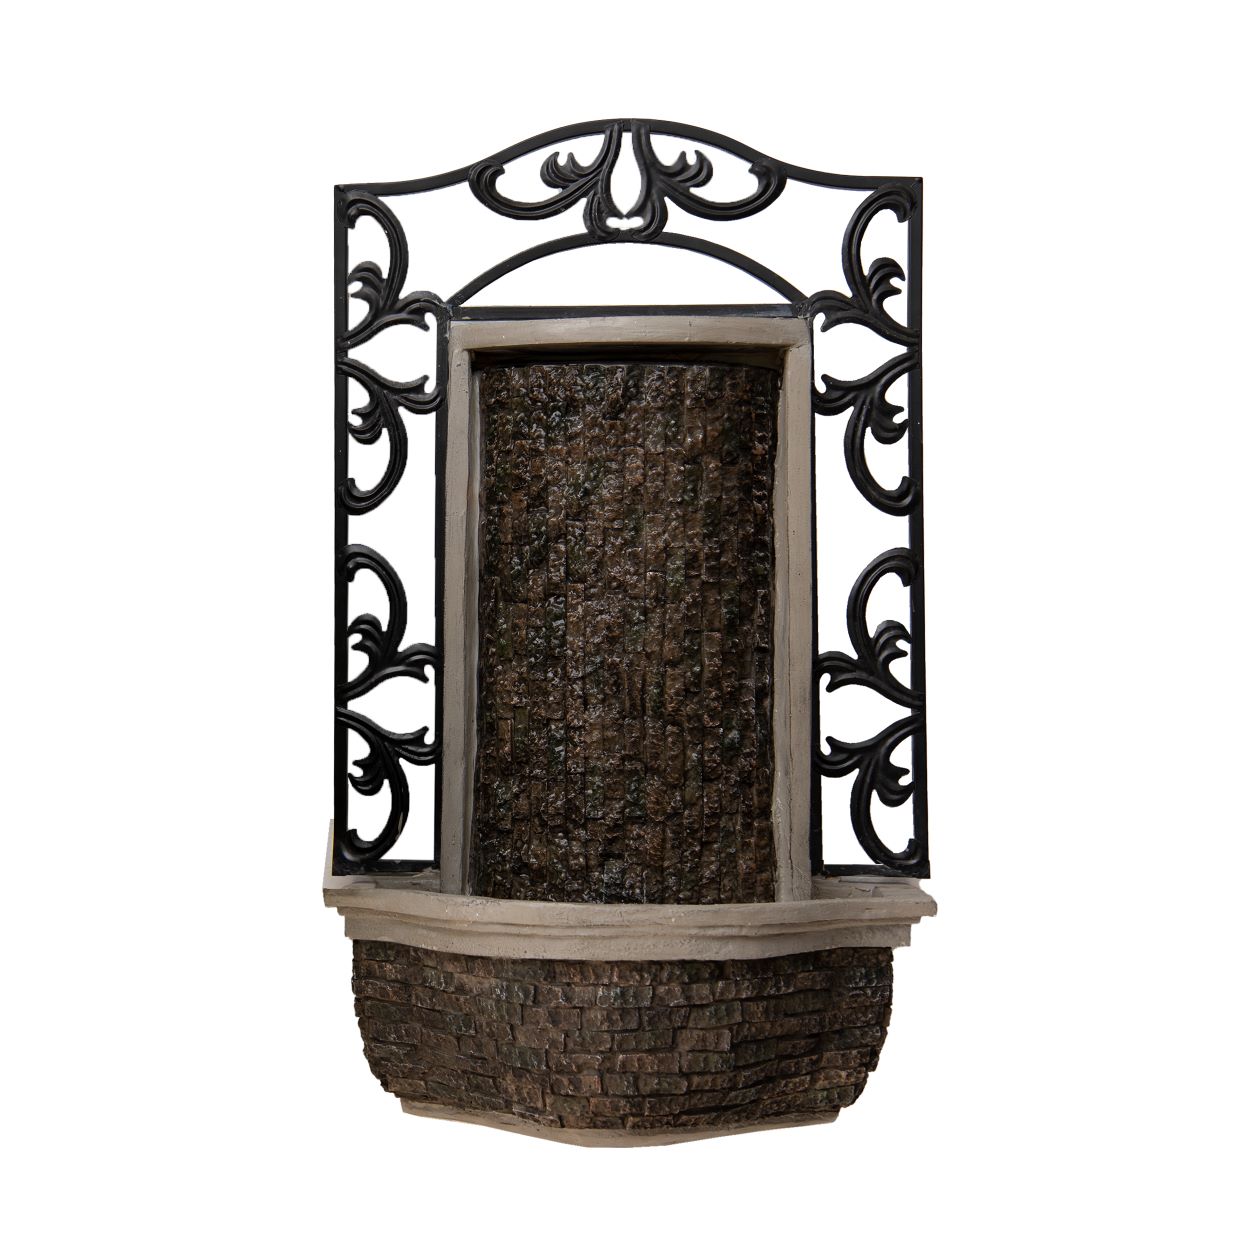 Discover our fountain collection - wall-mounted waterfalls, meditating & Zen fountains, and decorative designs for indoor/outdoor décor. Shop Now!